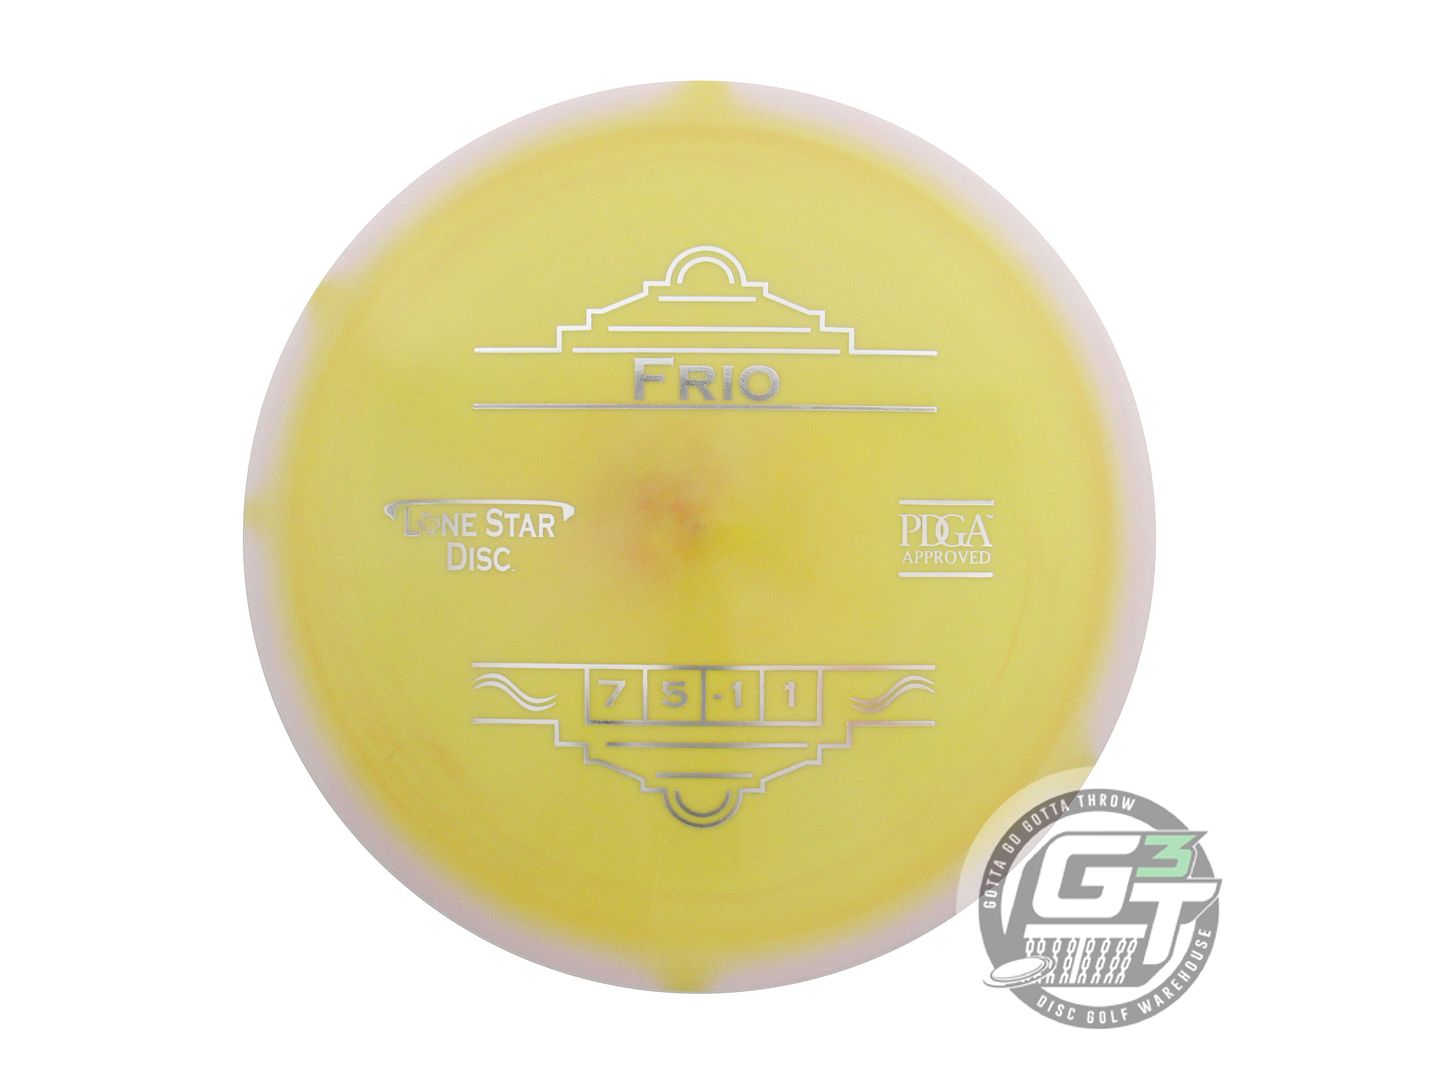 Lone Star Lima Frio Fairway Driver Golf Disc (Individually Listed)